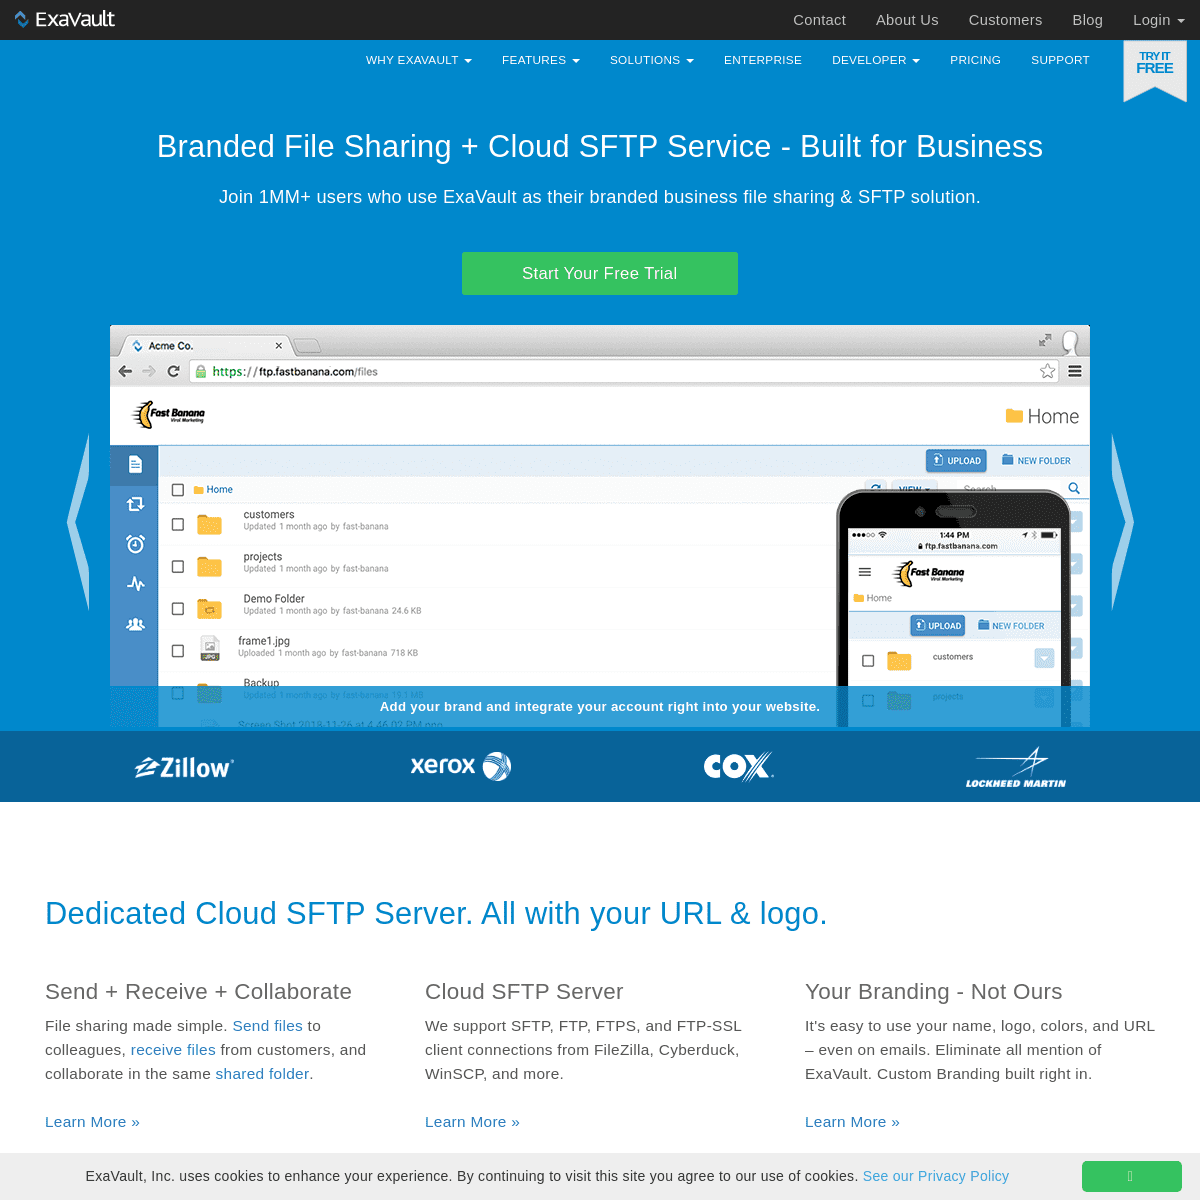 Branded File Sharing Service + Cloud SFTP & FTP | ExaVault